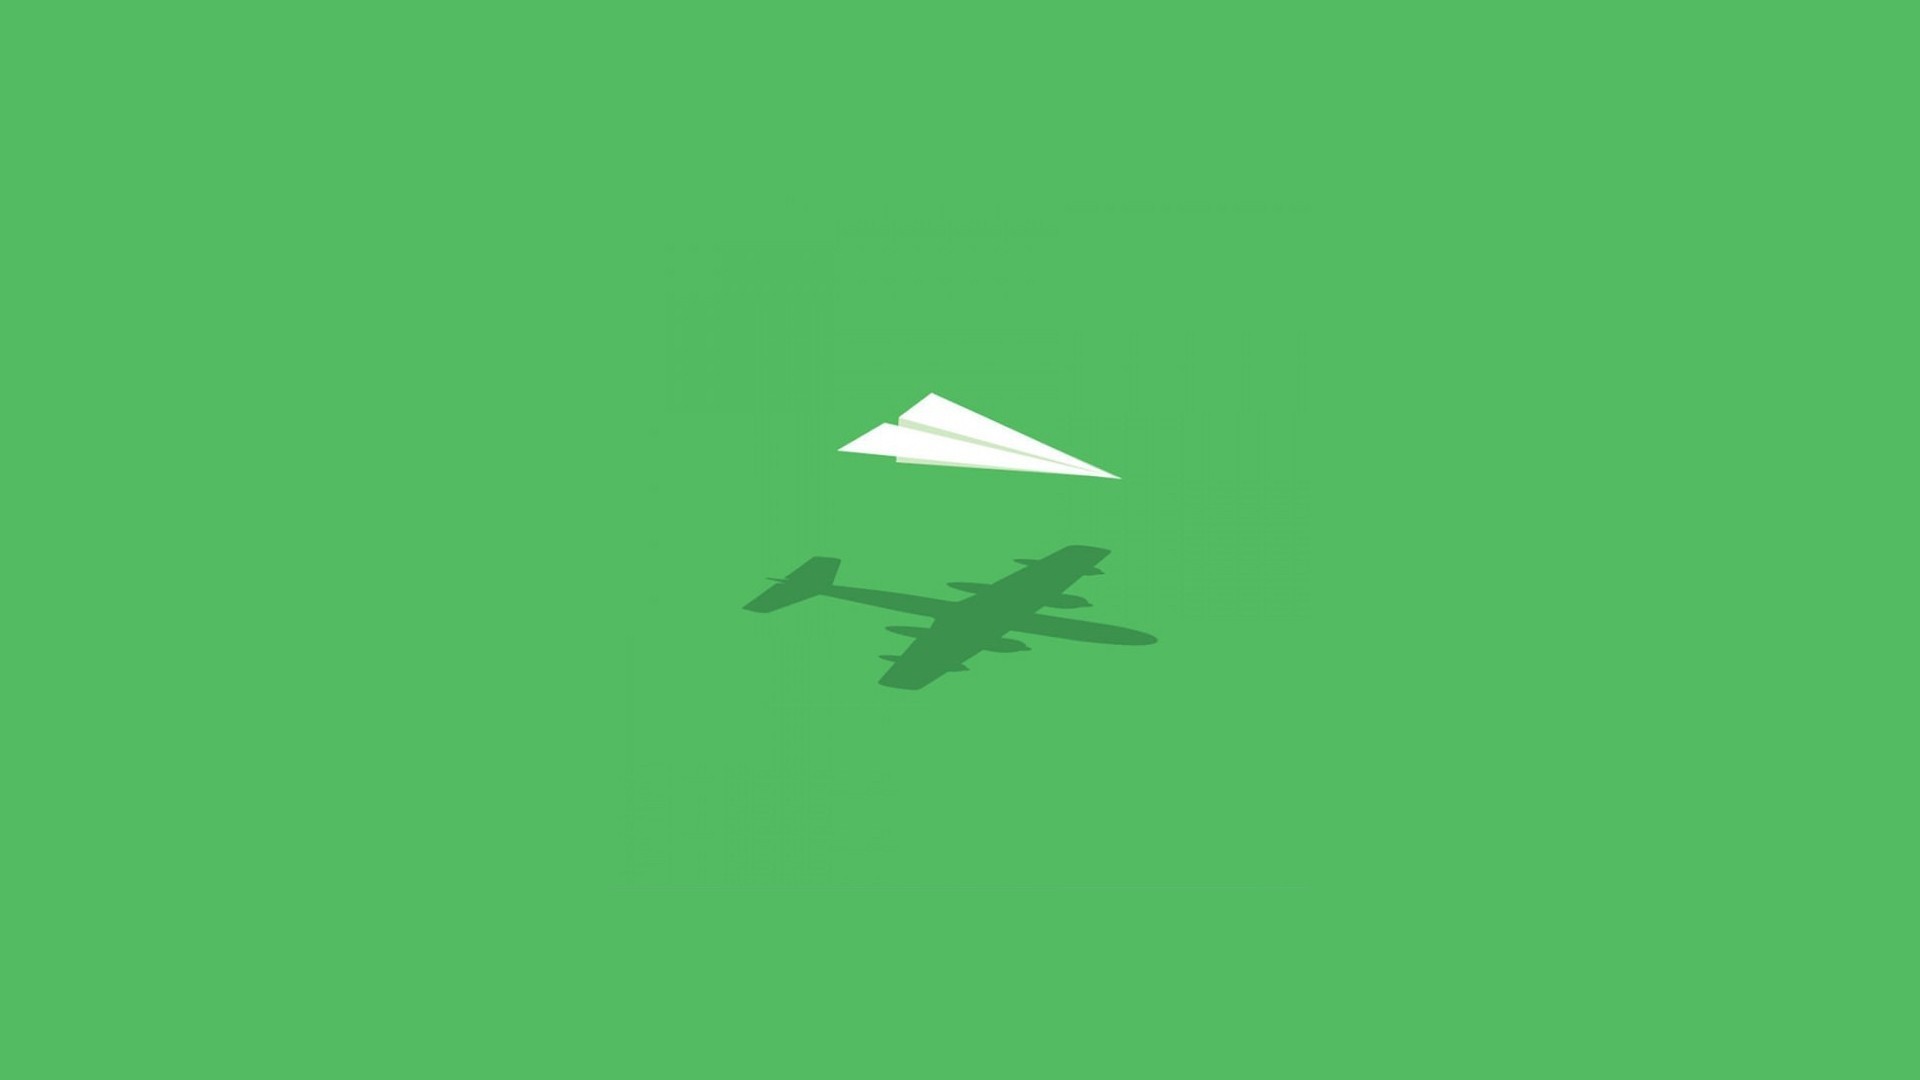 Airplane Silhouette And Paper Art Plane Minimal Hd - Paper Airplane Computer Background - HD Wallpaper 